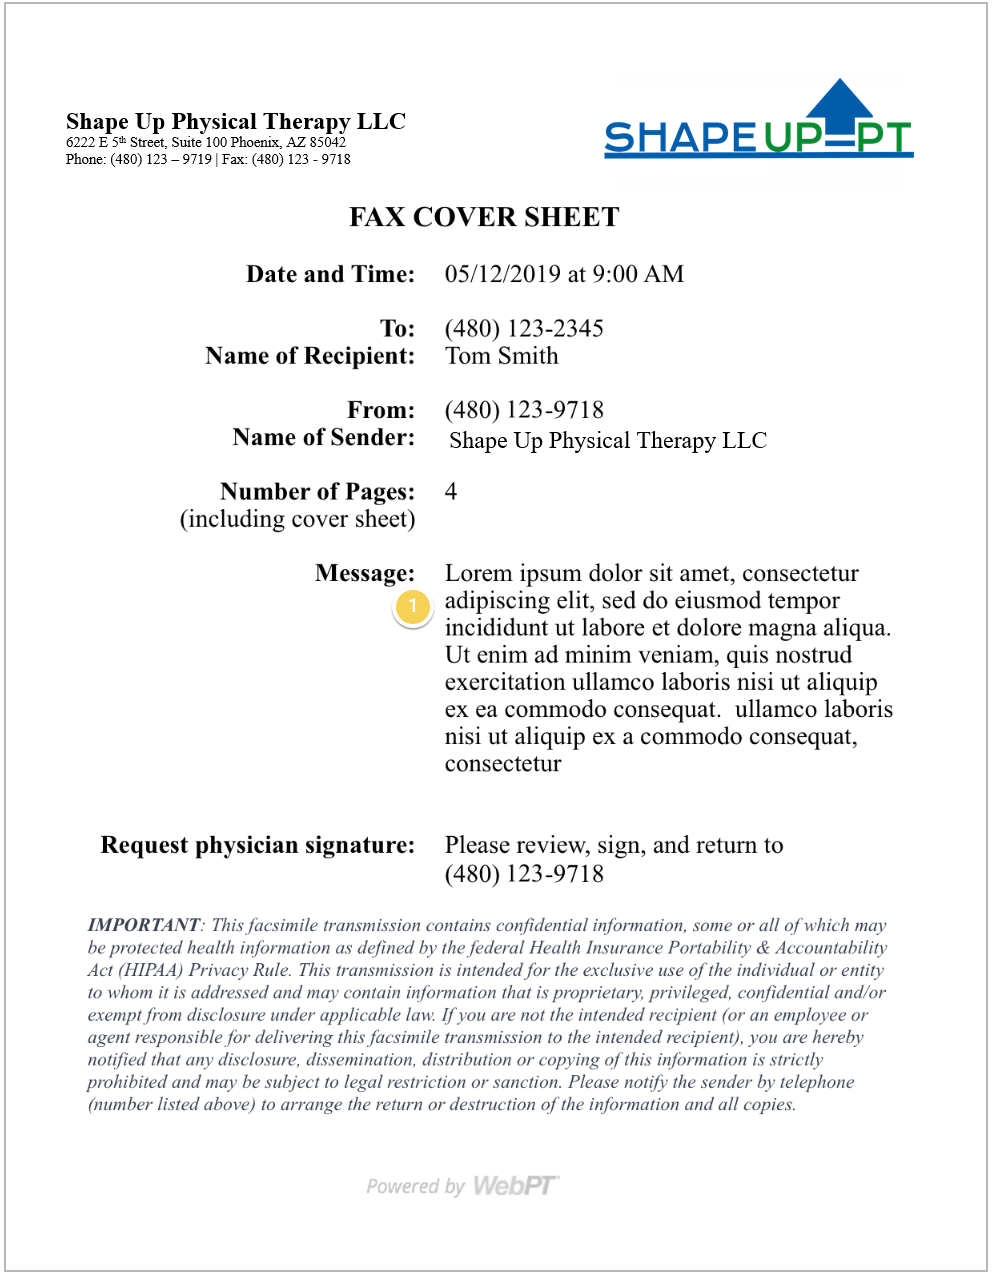 EMR_2.0_Patient Profile_Records_Fax_Cover Sheet